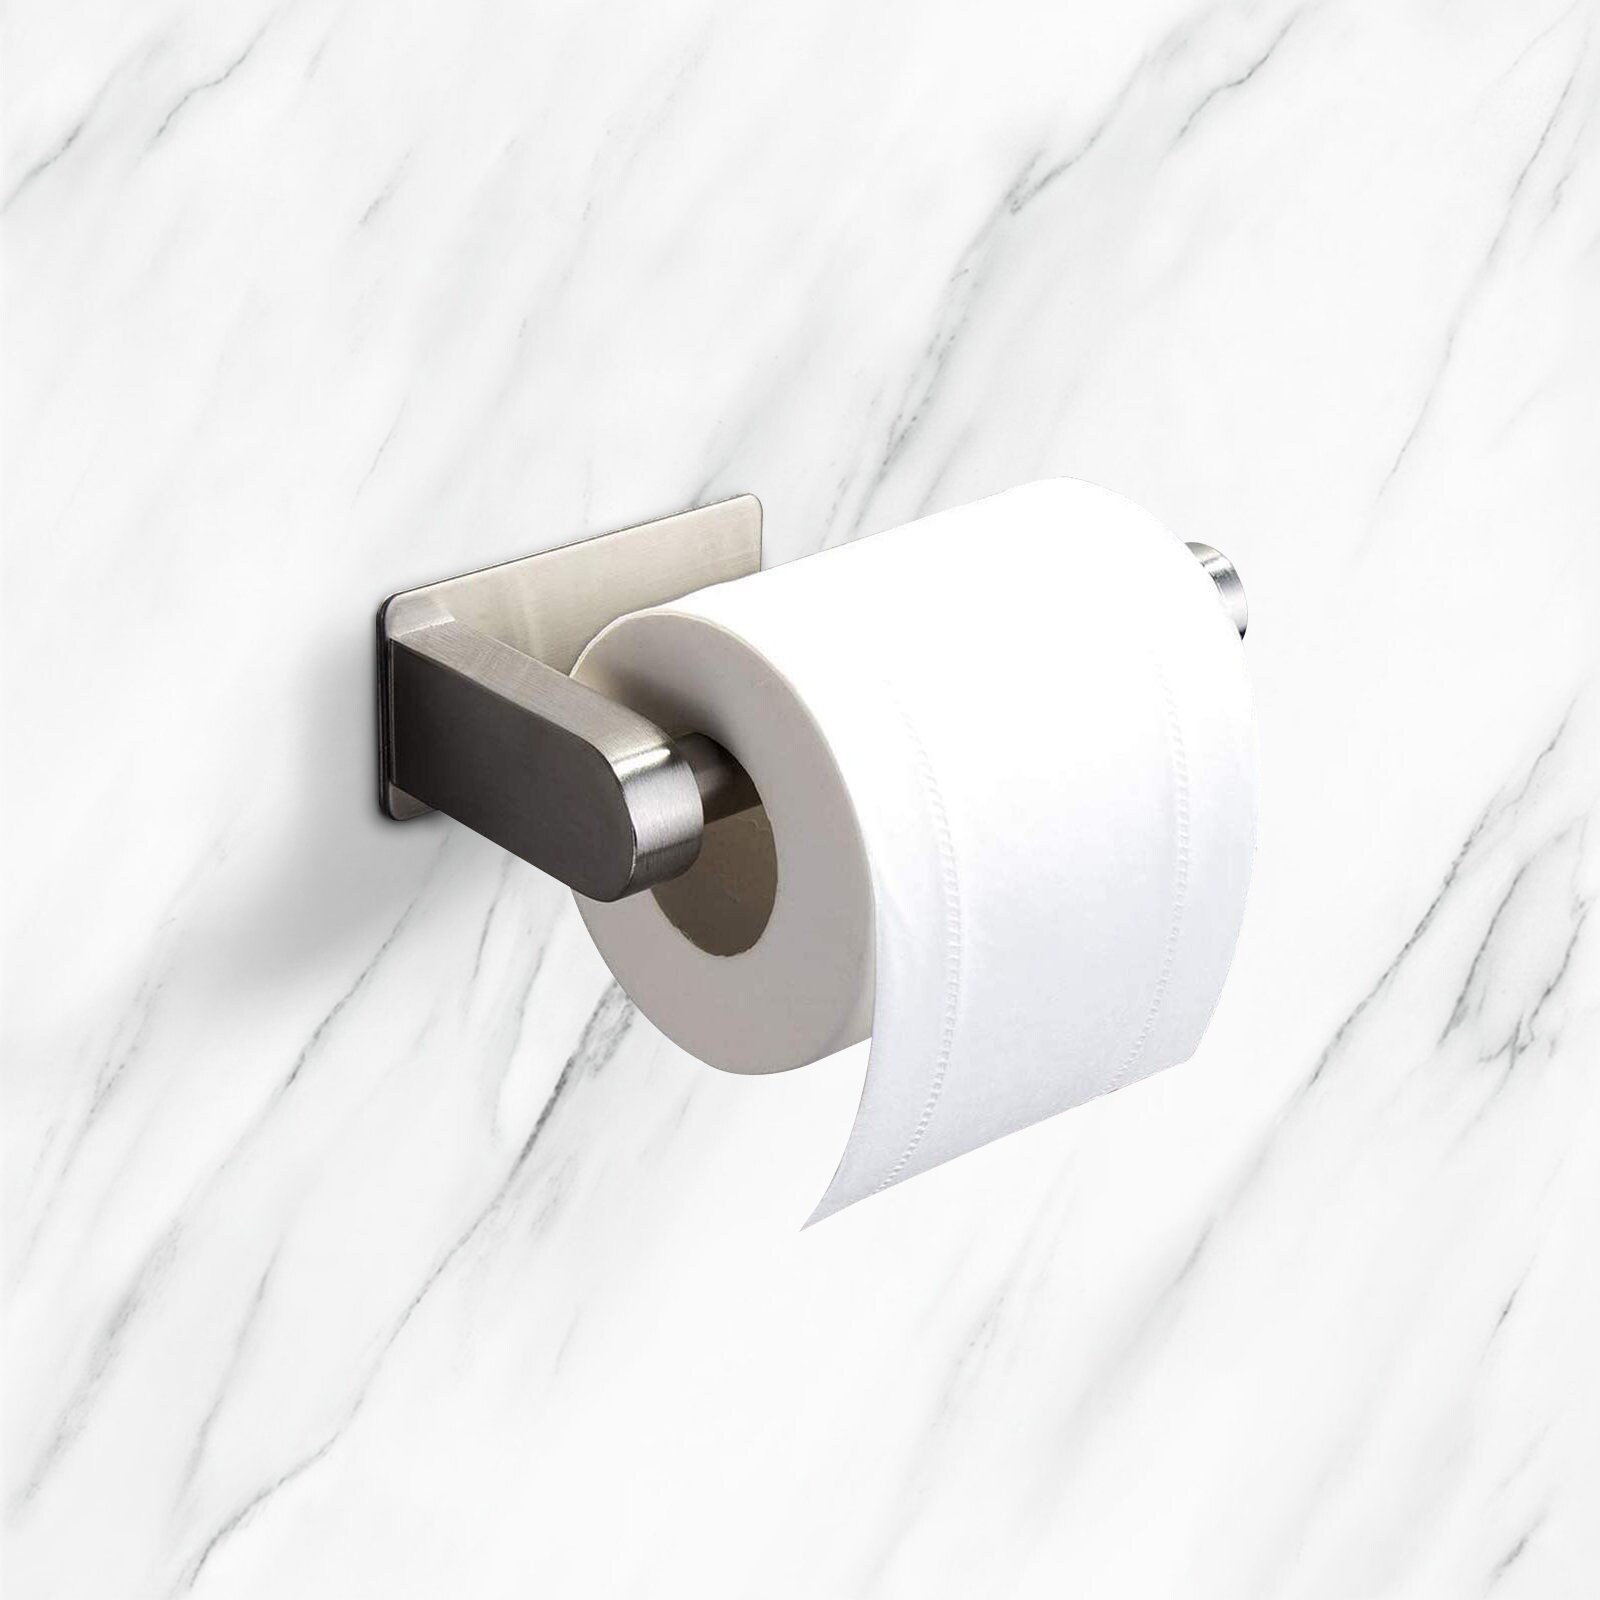 https://ak1.ostkcdn.com/images/products/is/images/direct/012e4be4e96e8f5874cf3291c7695dc8b2a6d0f6/Vanityfair-Self-Adhesive-Wall-Mounted-Toilet-Paper-Holder.jpg